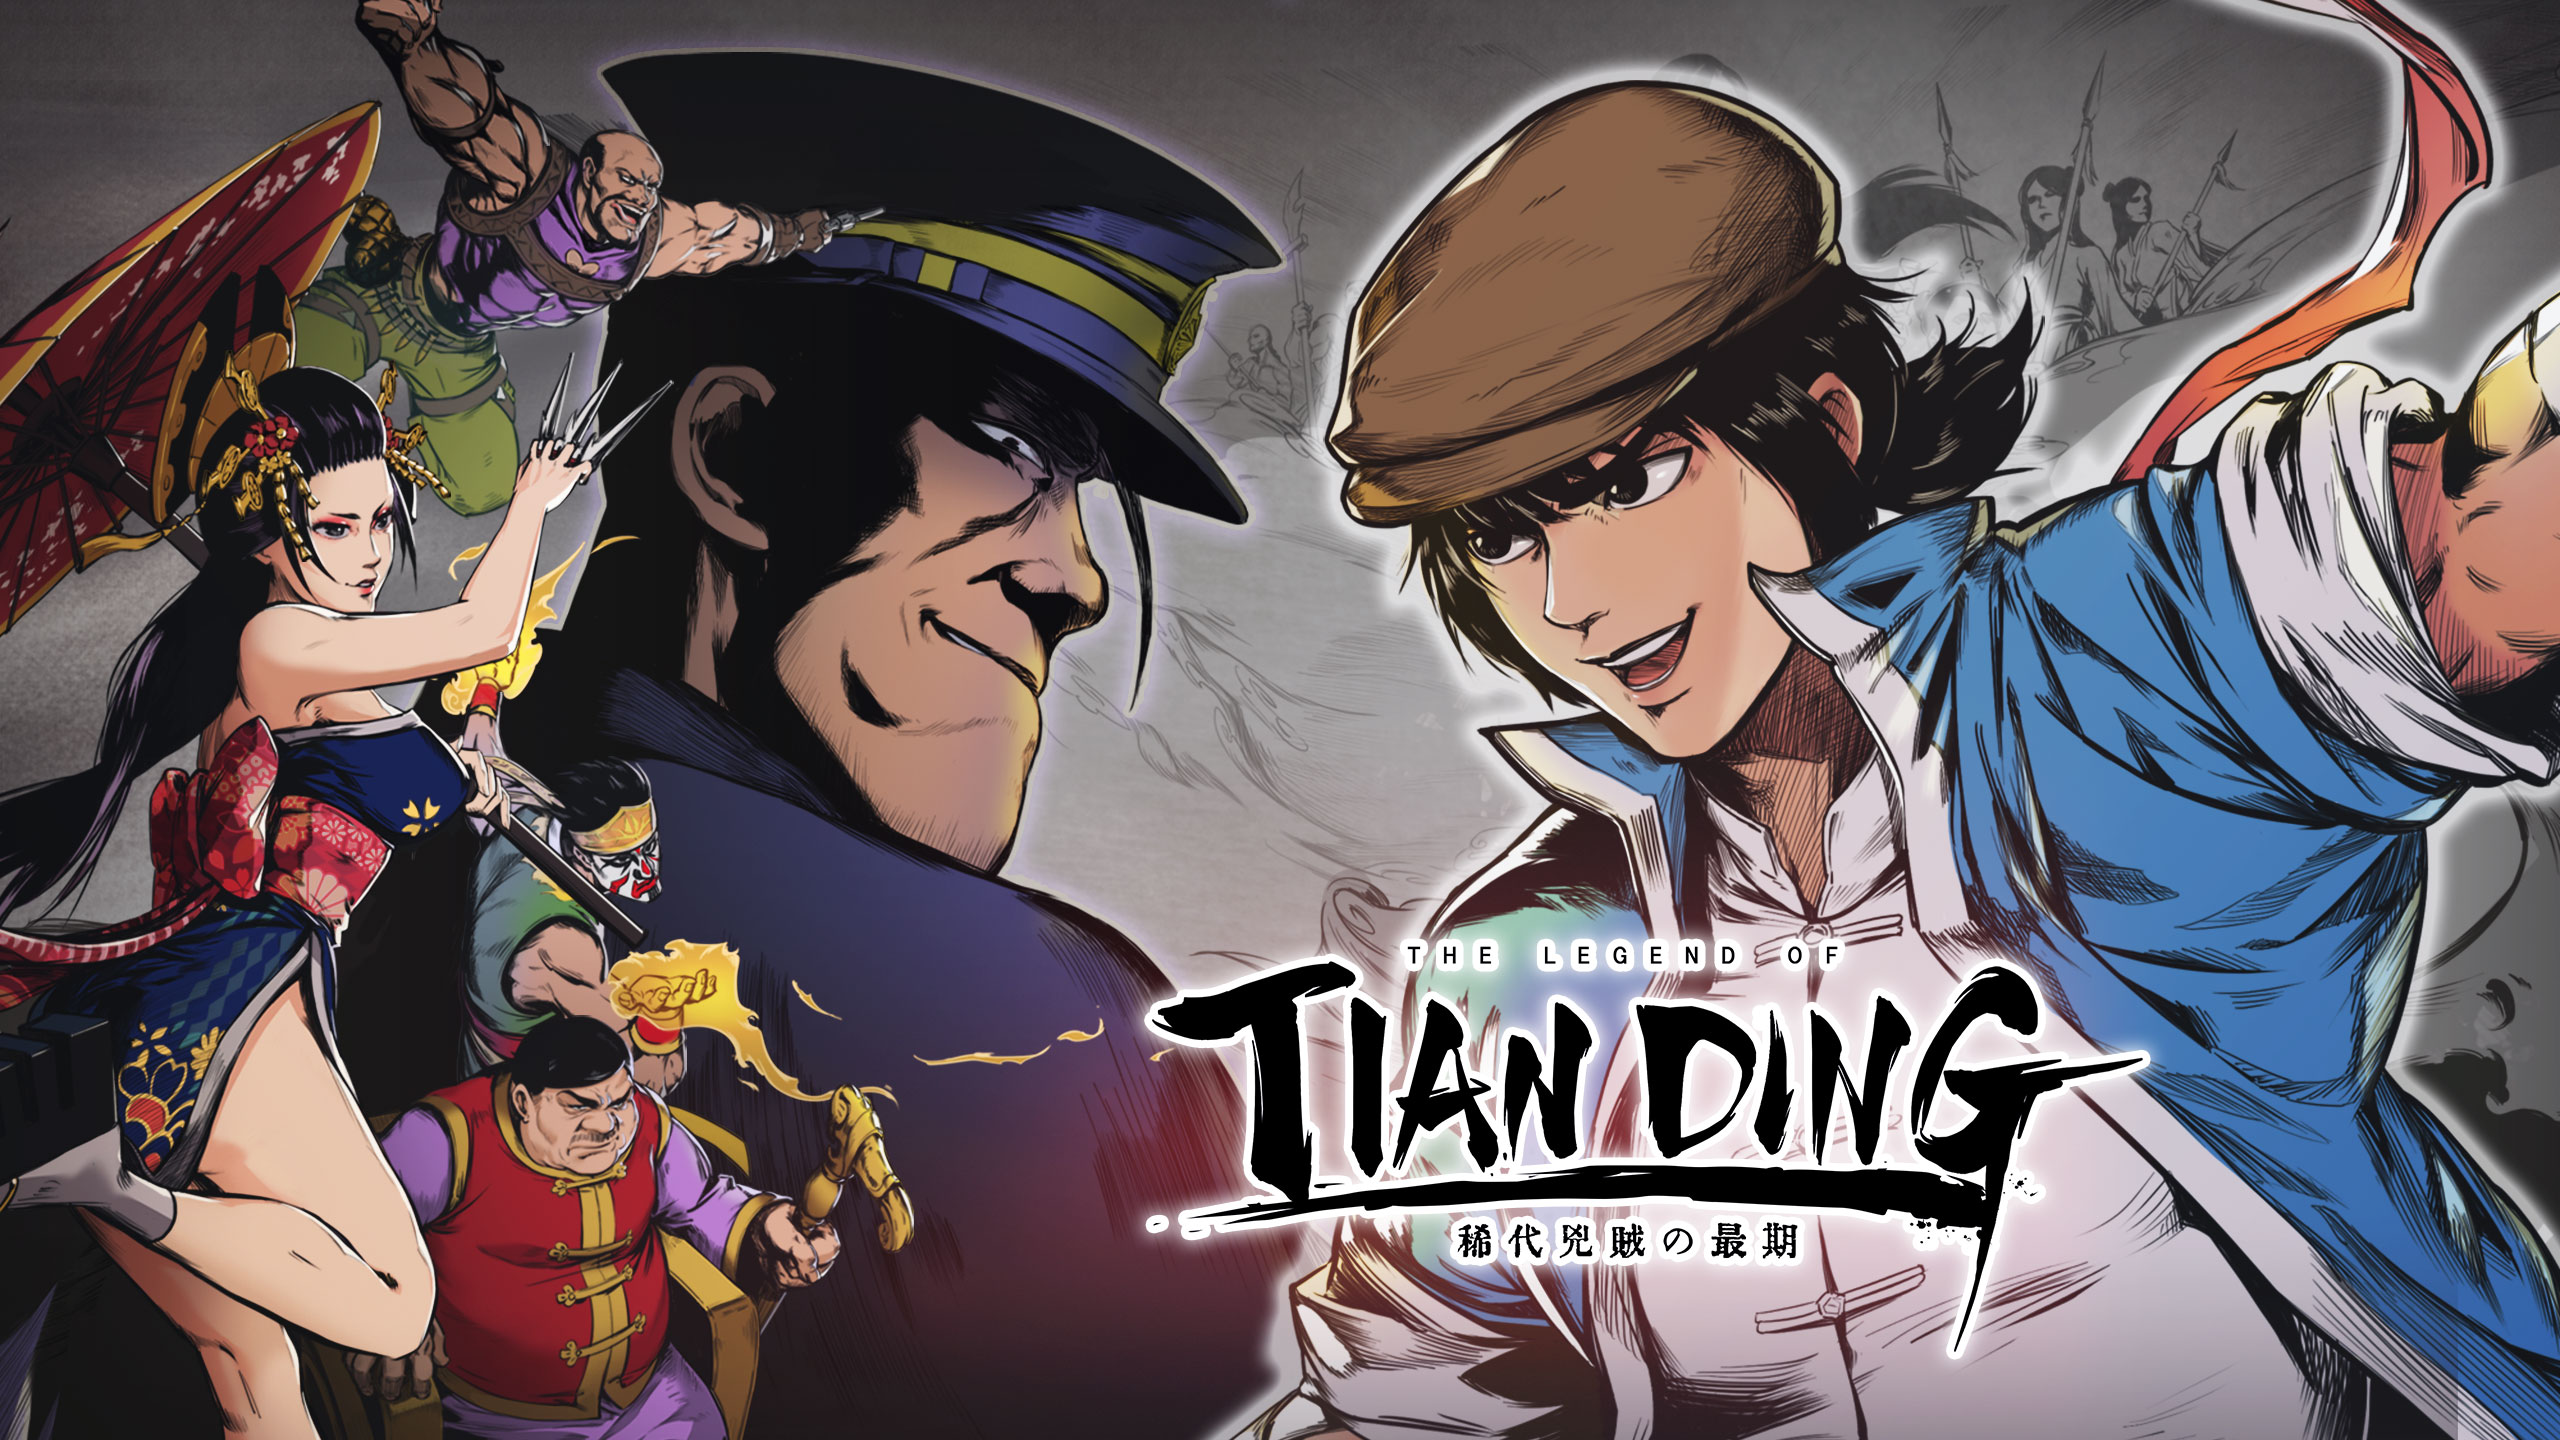 Taiwanese Robin Hood game The Legend of Tianding is coming to consoles